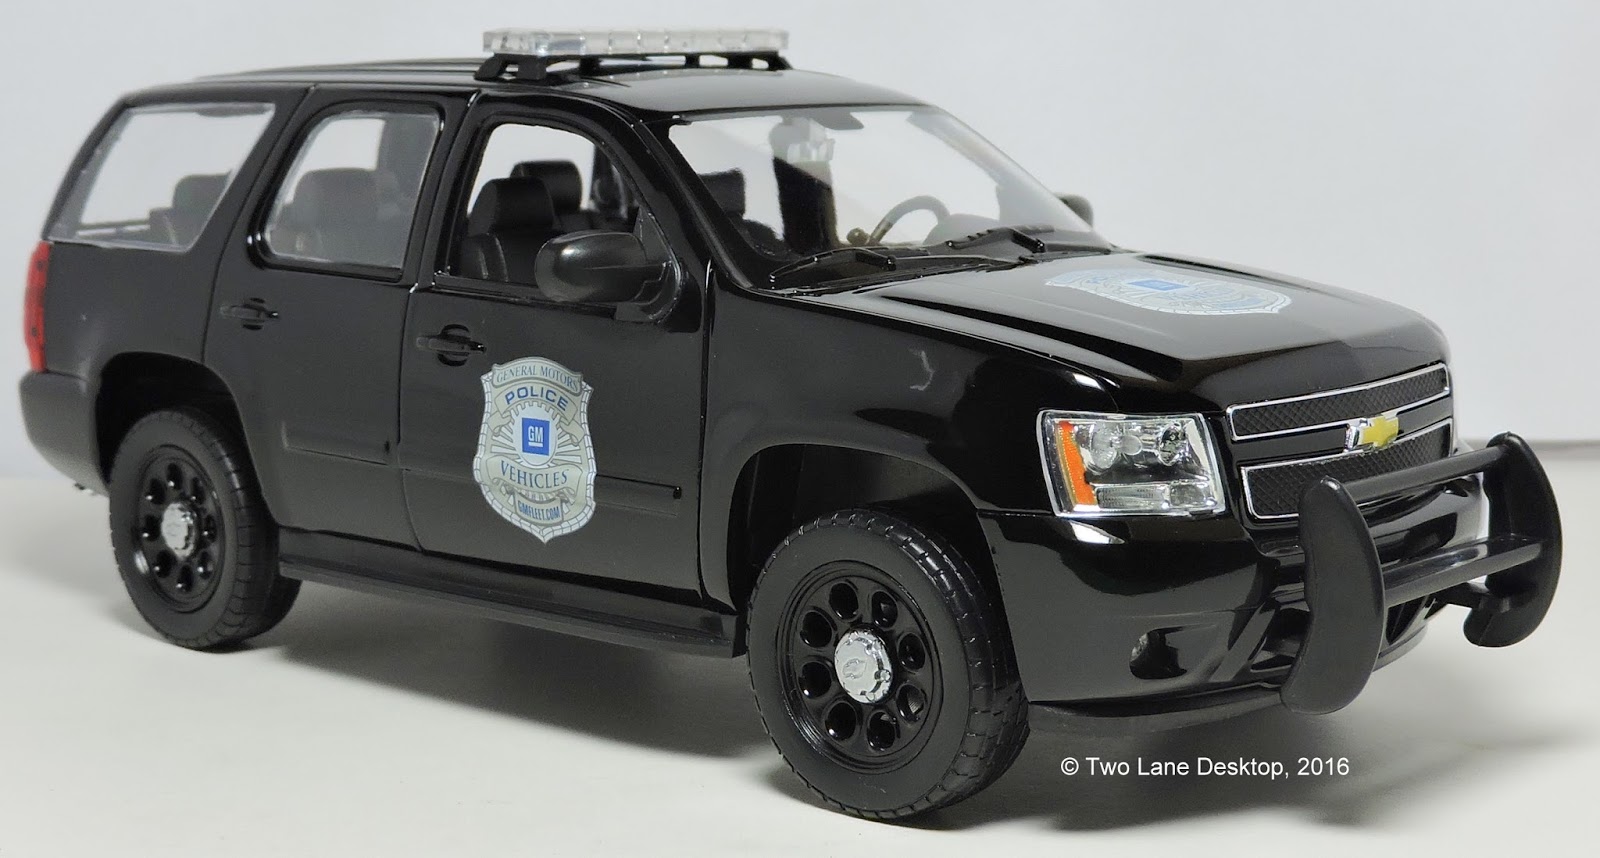 Police vehicles are a popular trend today as replica vehicles. 